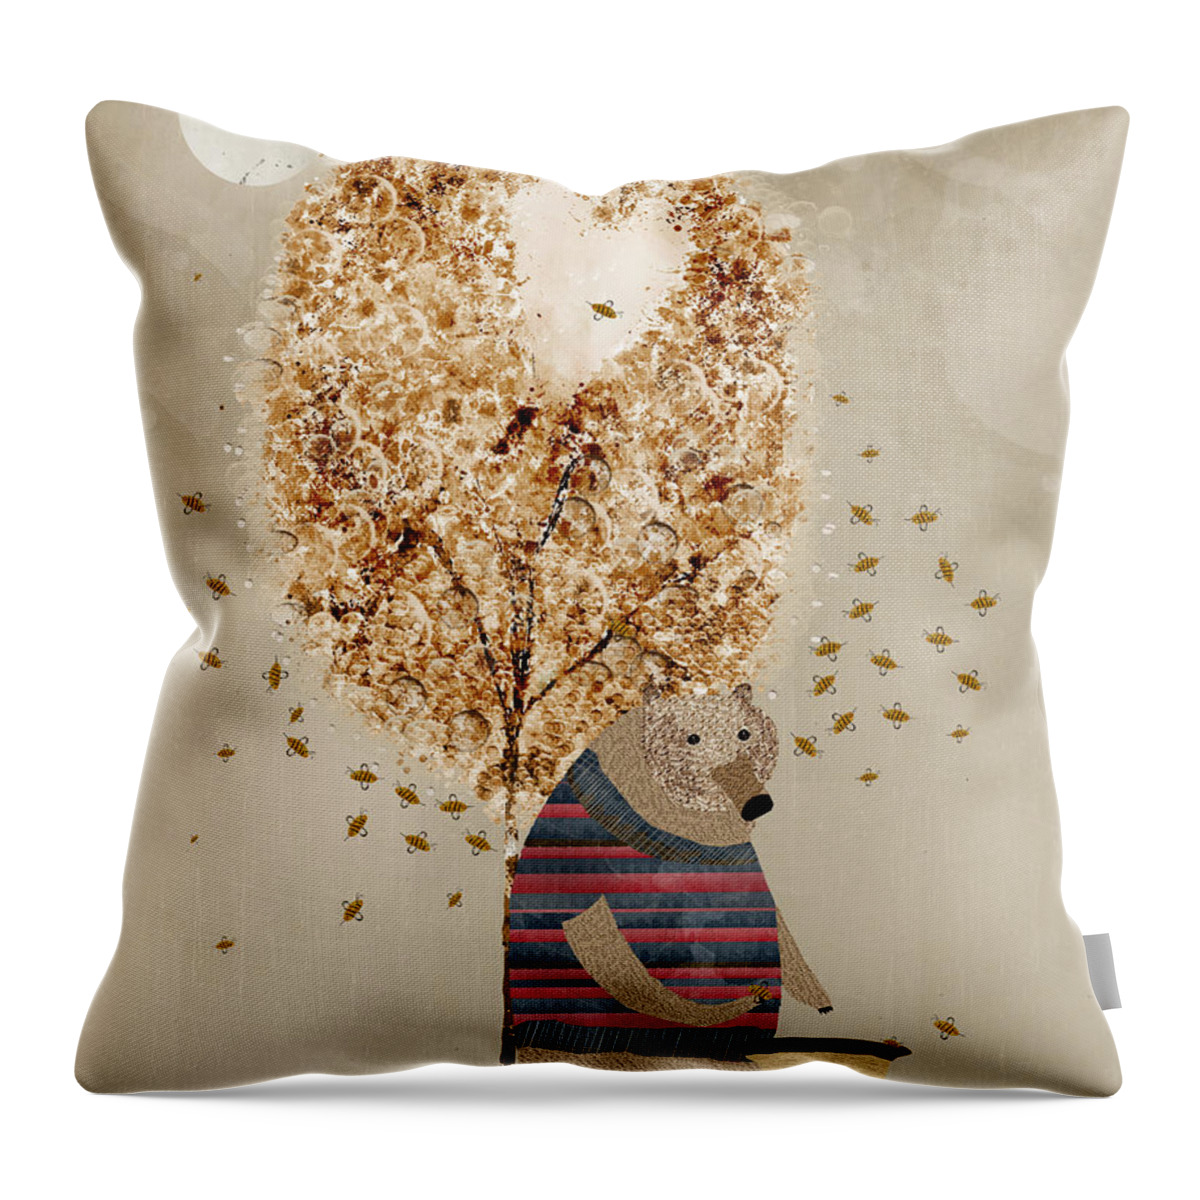 Bears Throw Pillow featuring the painting The Honey Tree by Bri Buckley